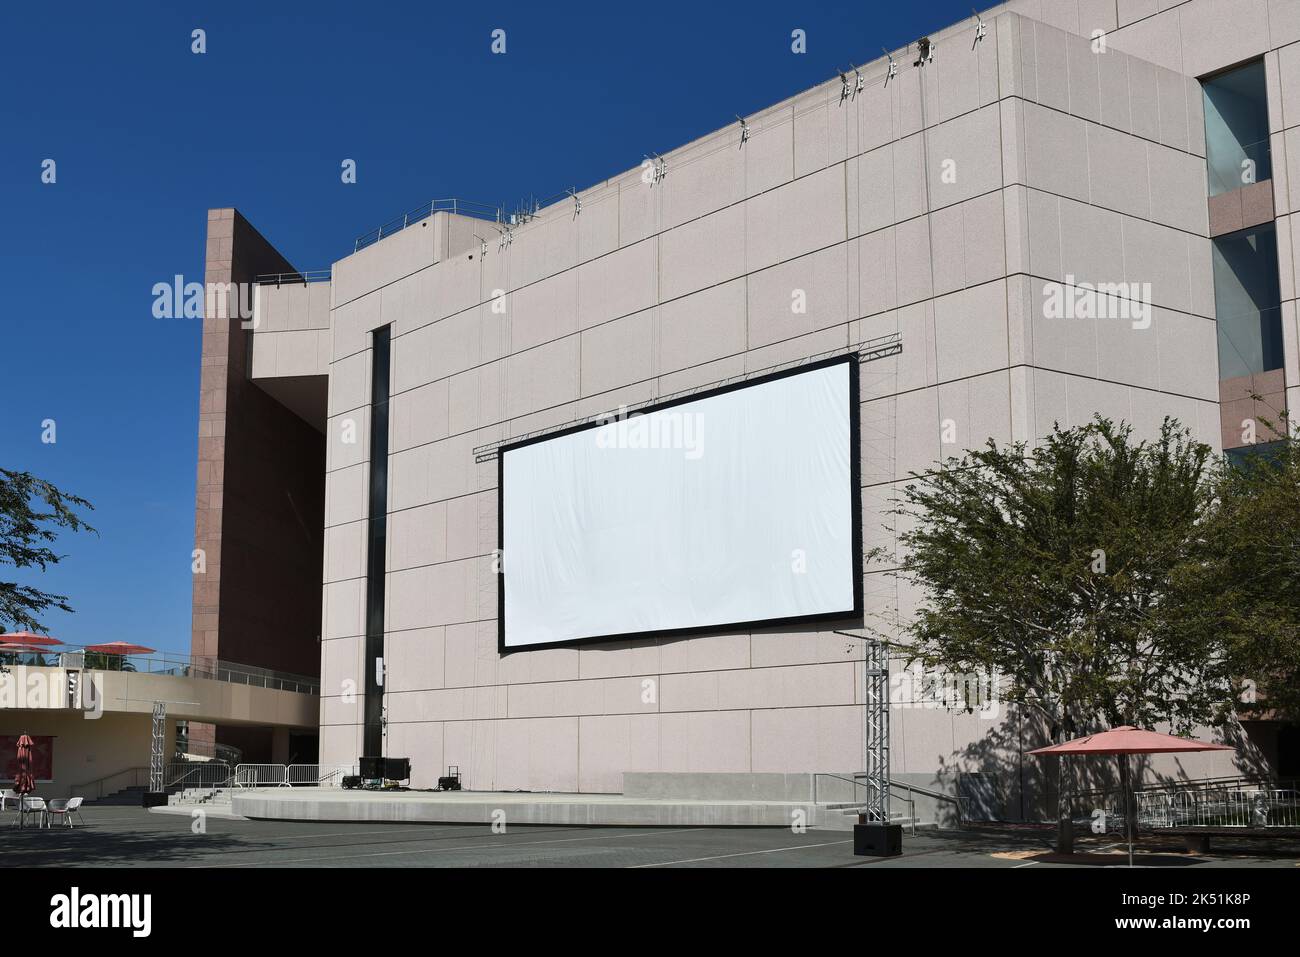 COSTA MESA, CALIFORNIA - 02 OCT 2022: Large screen for an outdoor event in The Julianne and George Argyros Plaza at the Segerstrom Center for the Arts Stock Photo